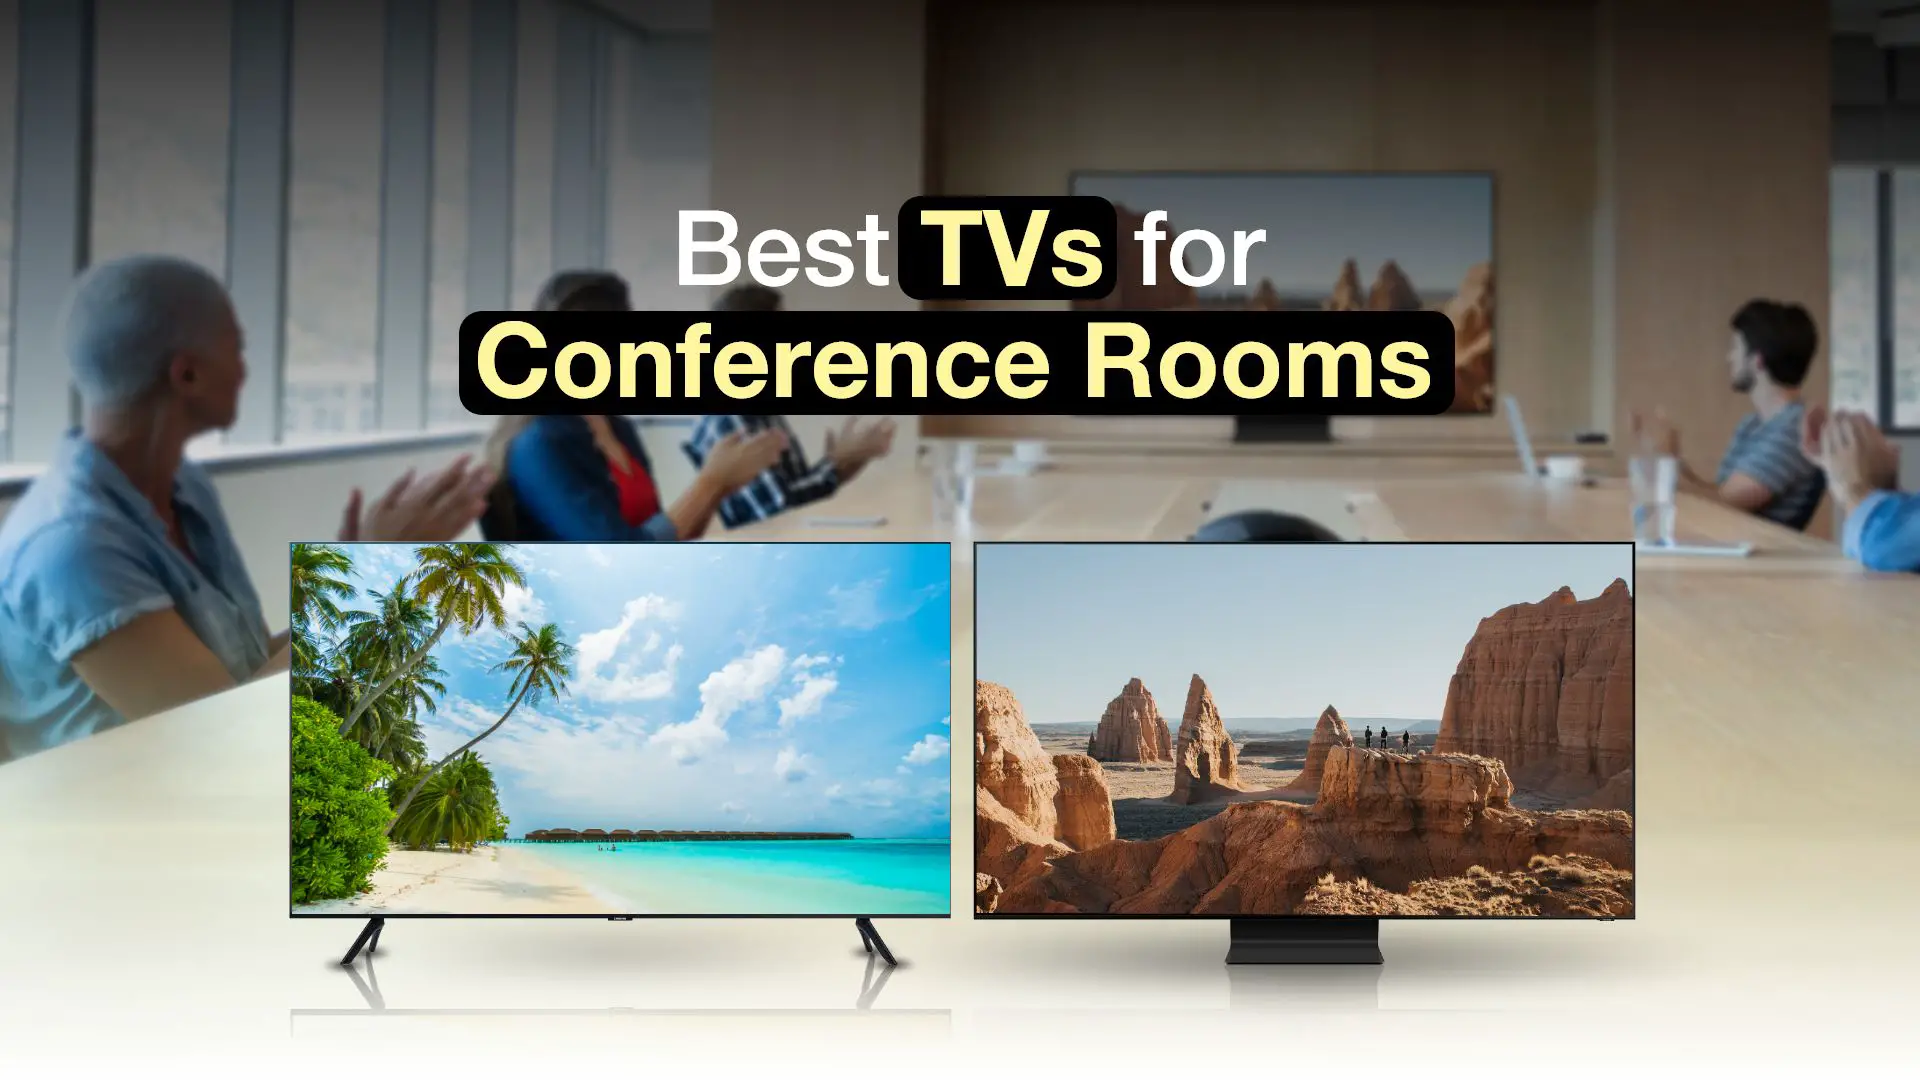 Best TVs for Conference Rooms